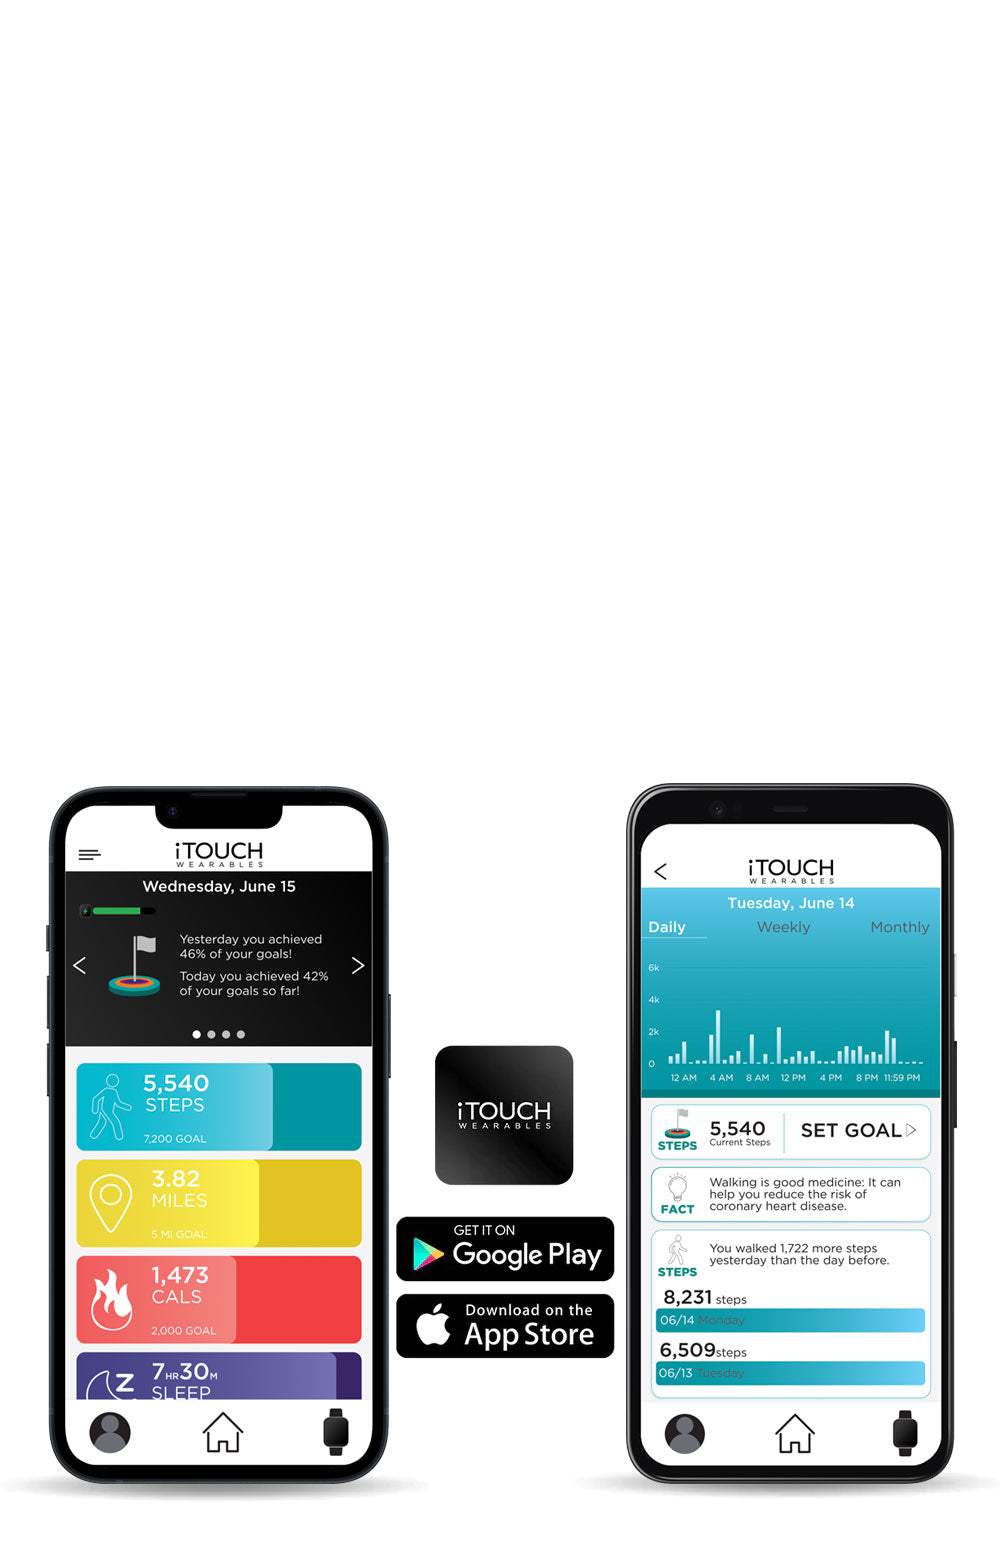 Download the iTouch Wearables App on the App Store or Google Play Store